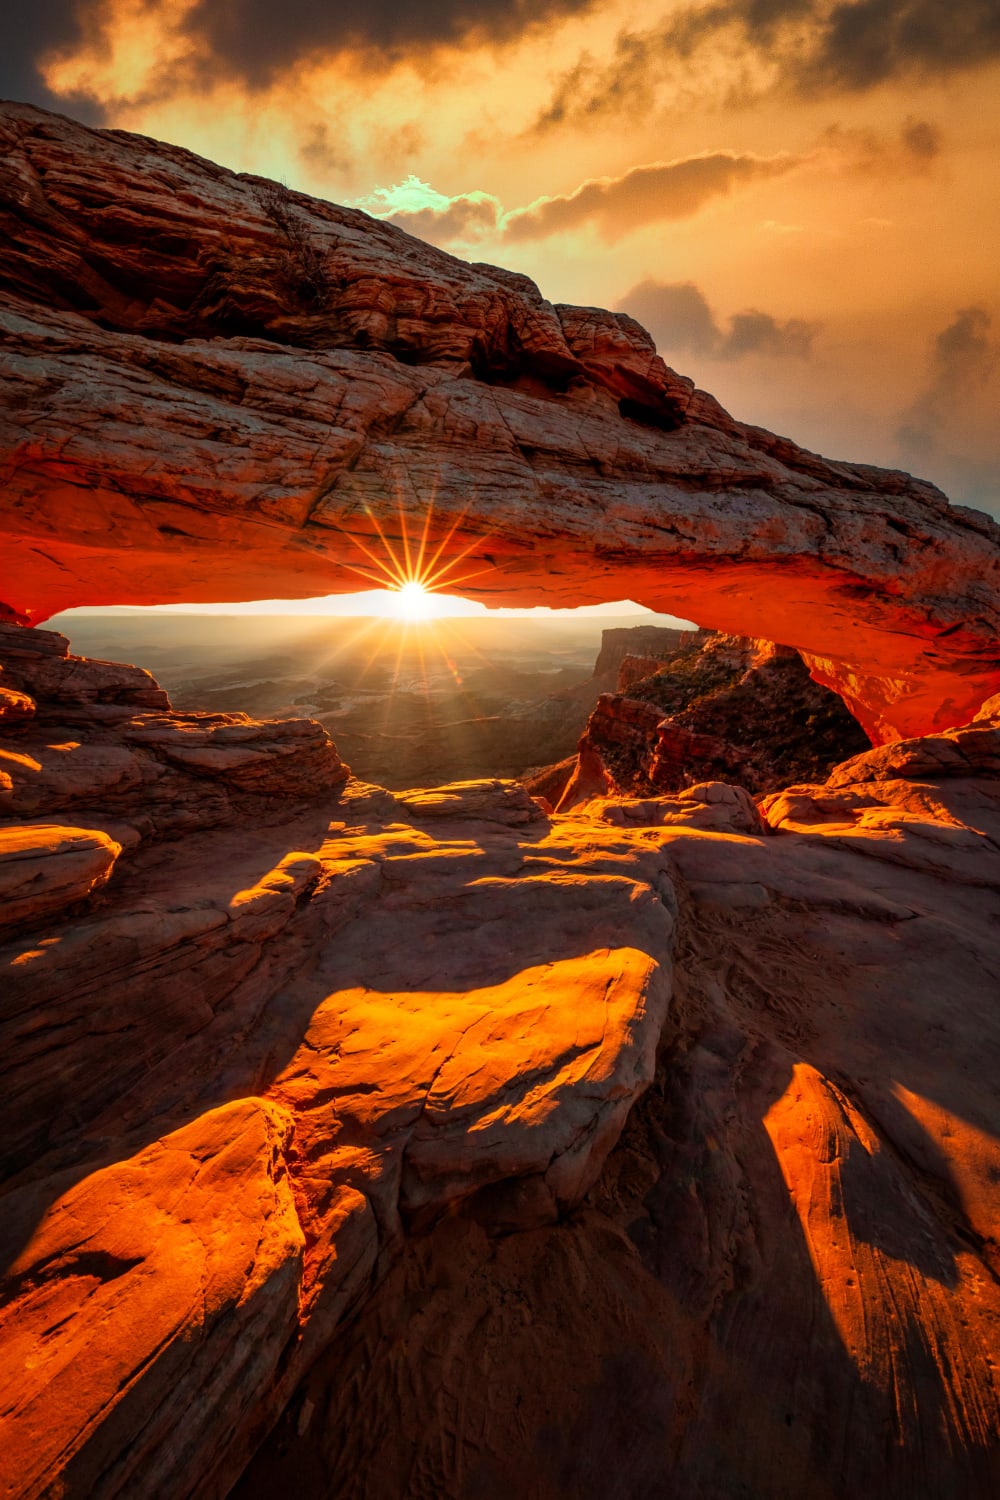 Sunrise at the iconic Mesa Arch in Canyonlands National Park, Moab, UT IG: @jmke.visuals